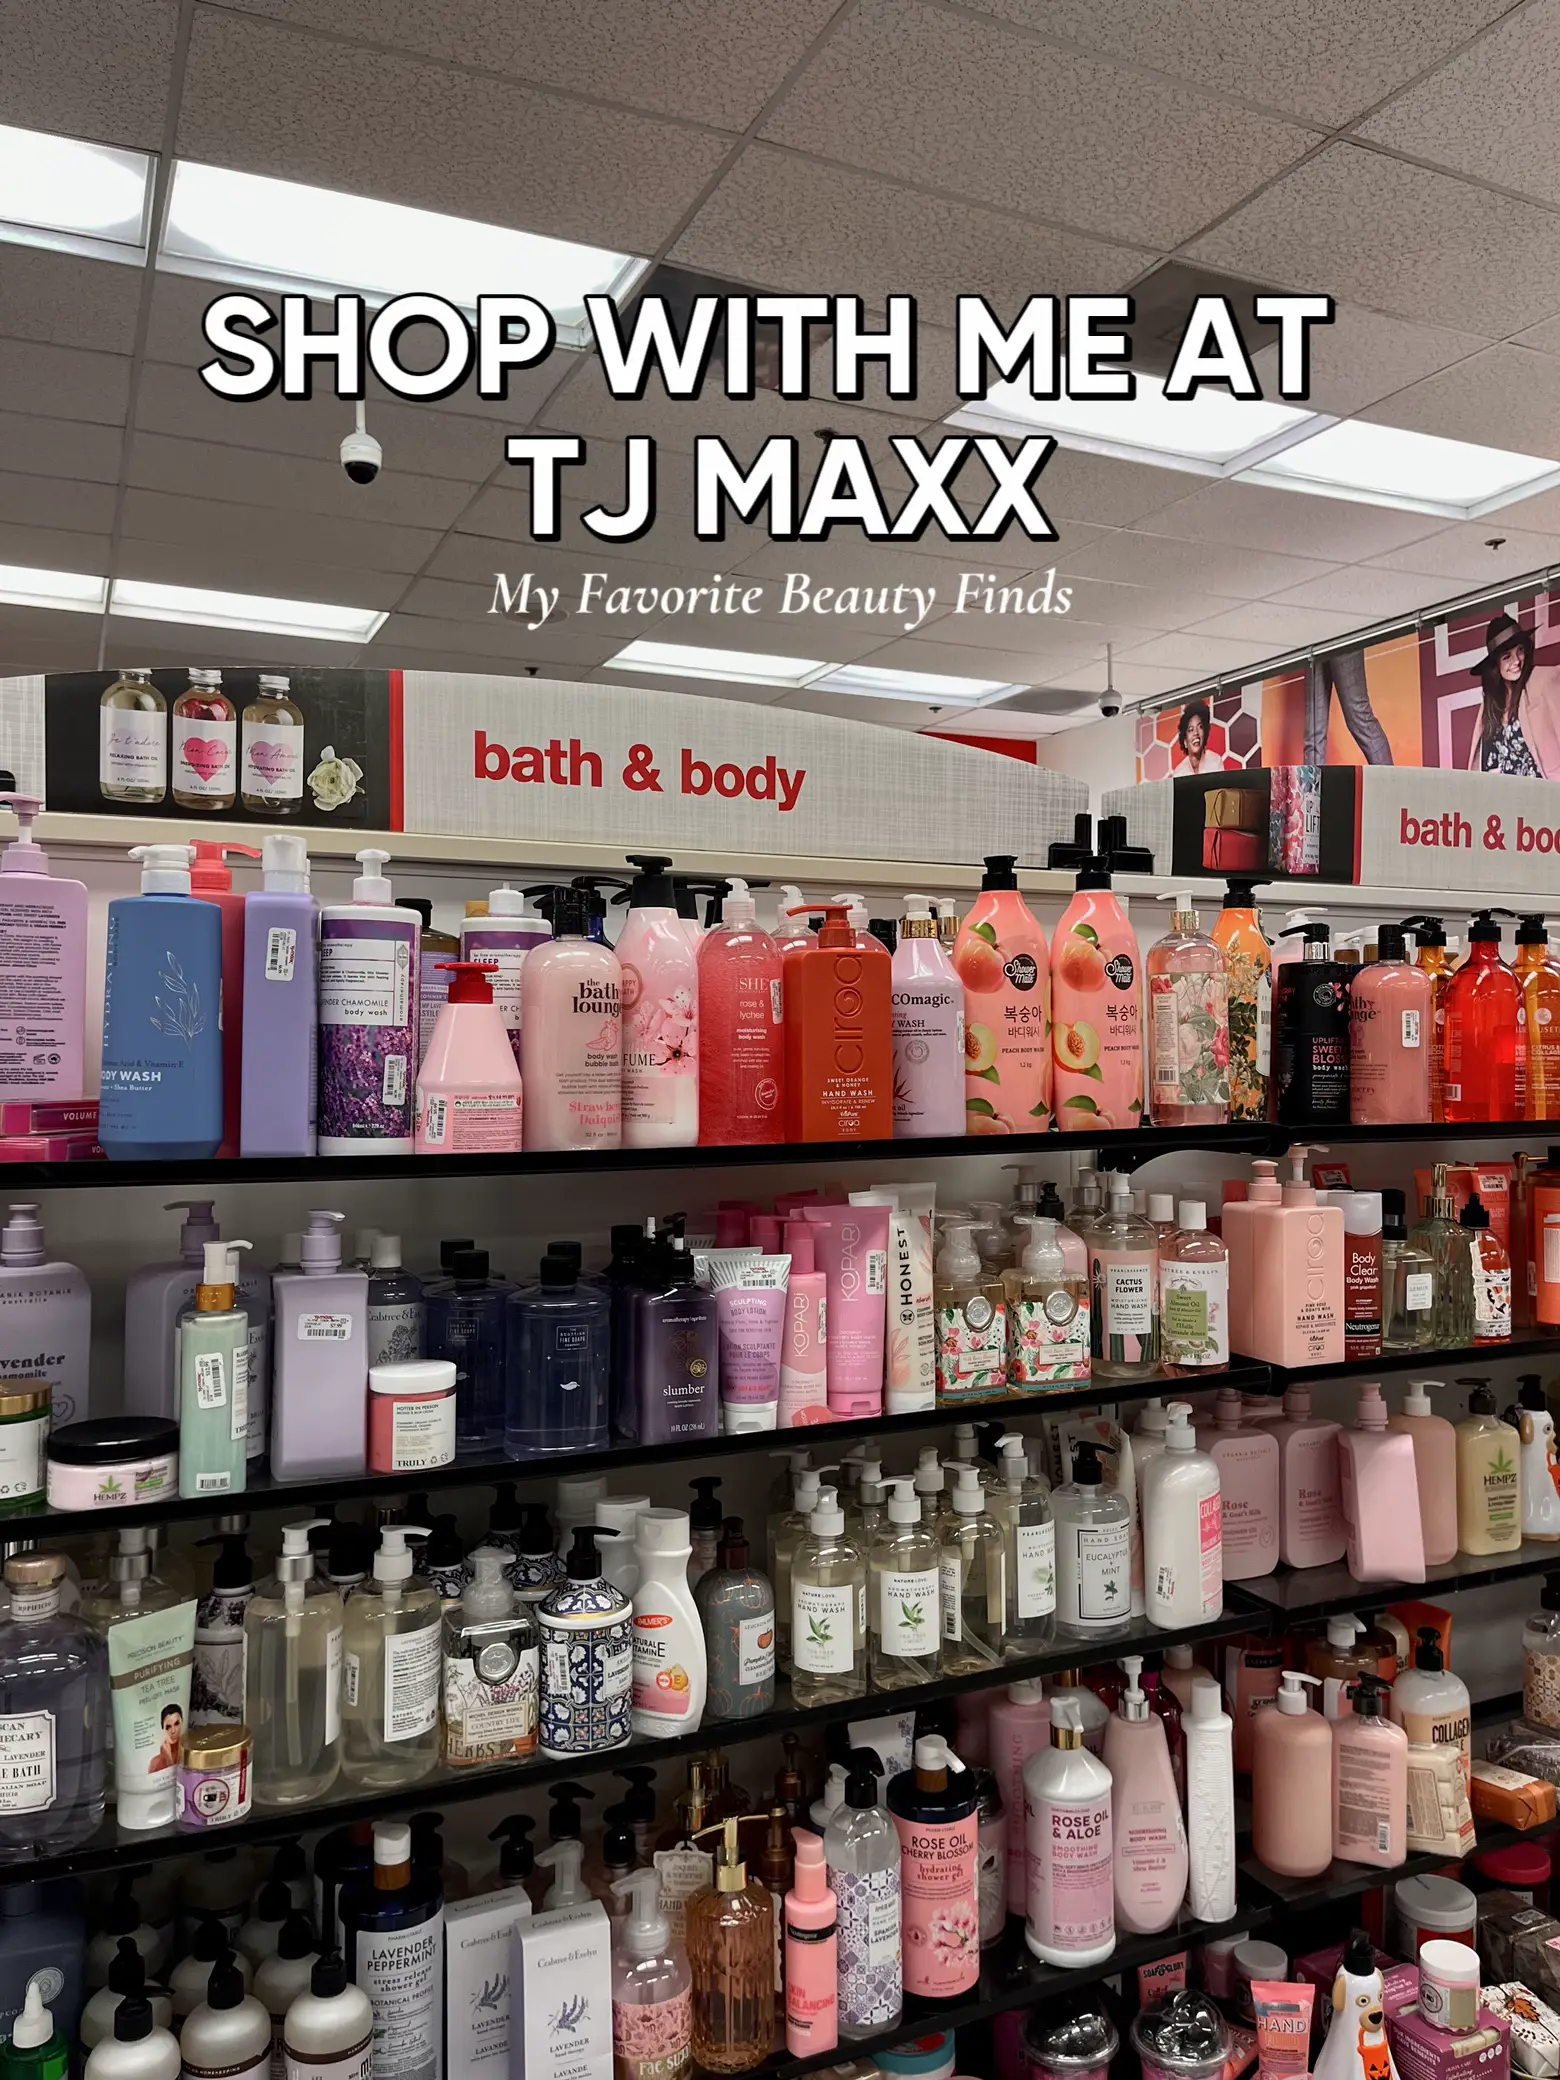 SUMMER SHOP WITH ME AT TJ MAXX